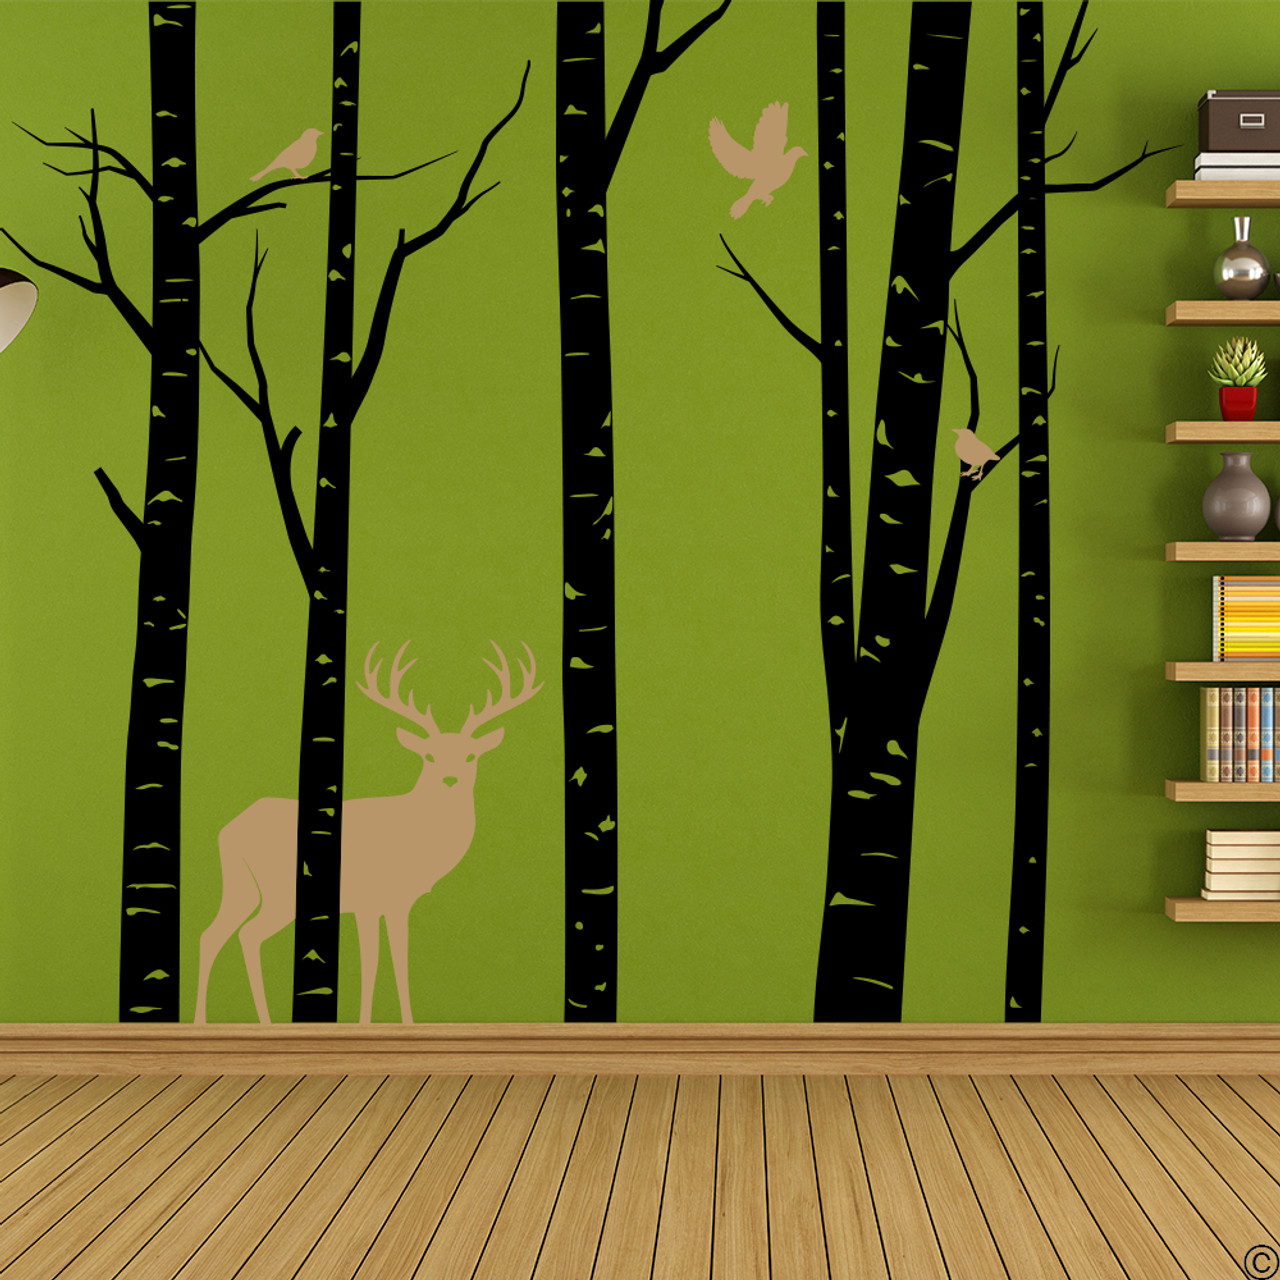 Aspen Trees mural with deer and birds vinyl wall decal in black and light brown